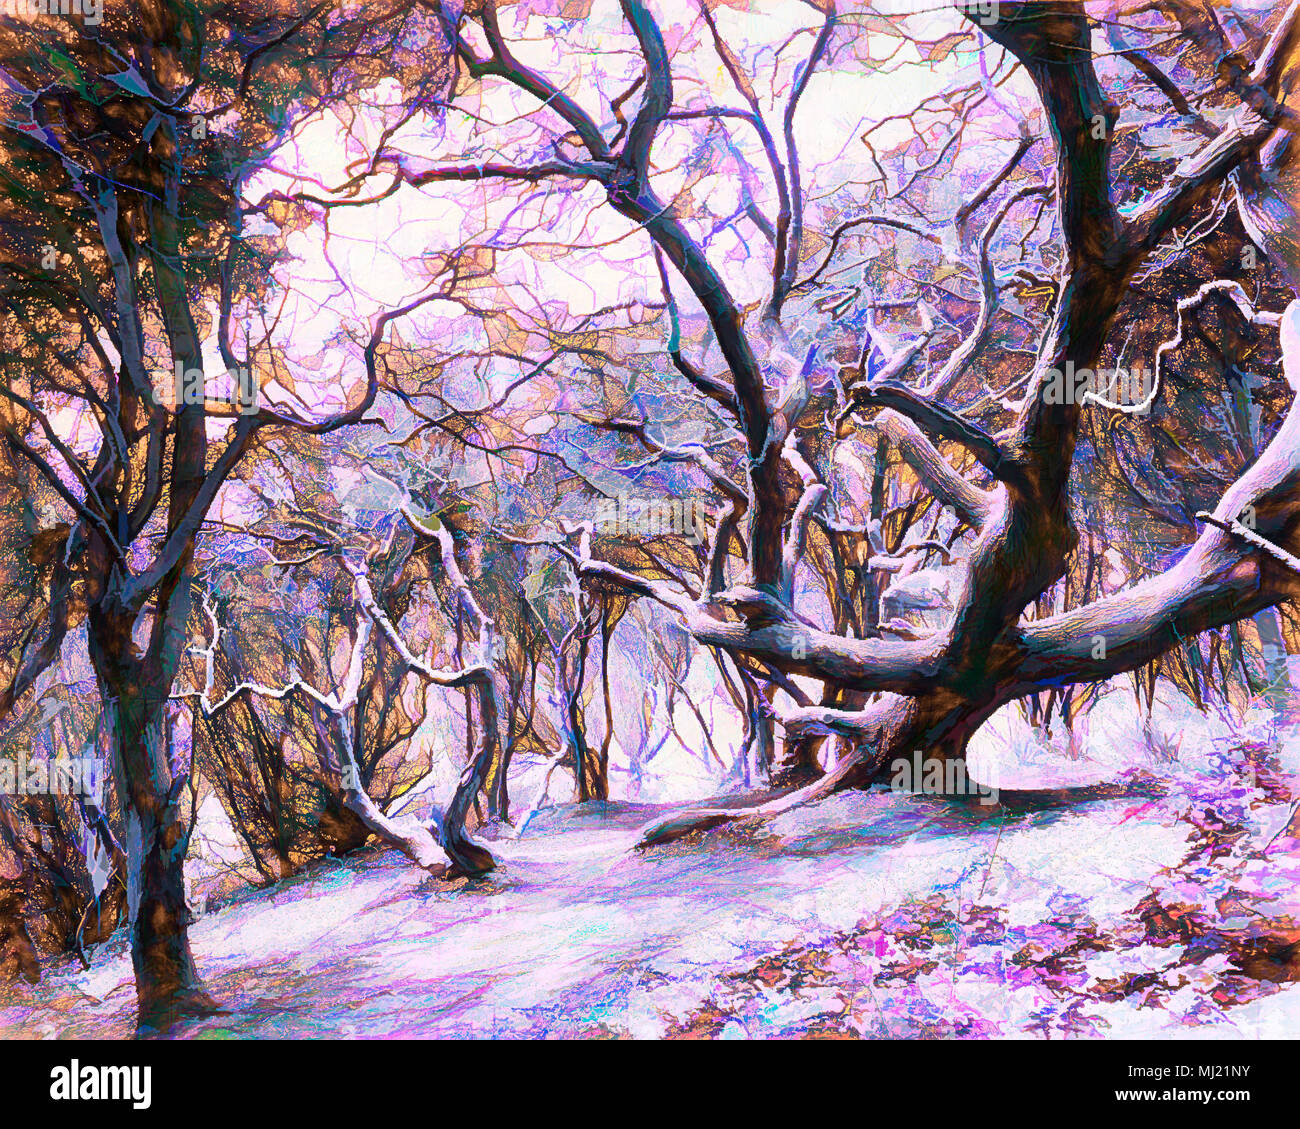 DIGITAL ART: Winter in the Forest Stock Photo